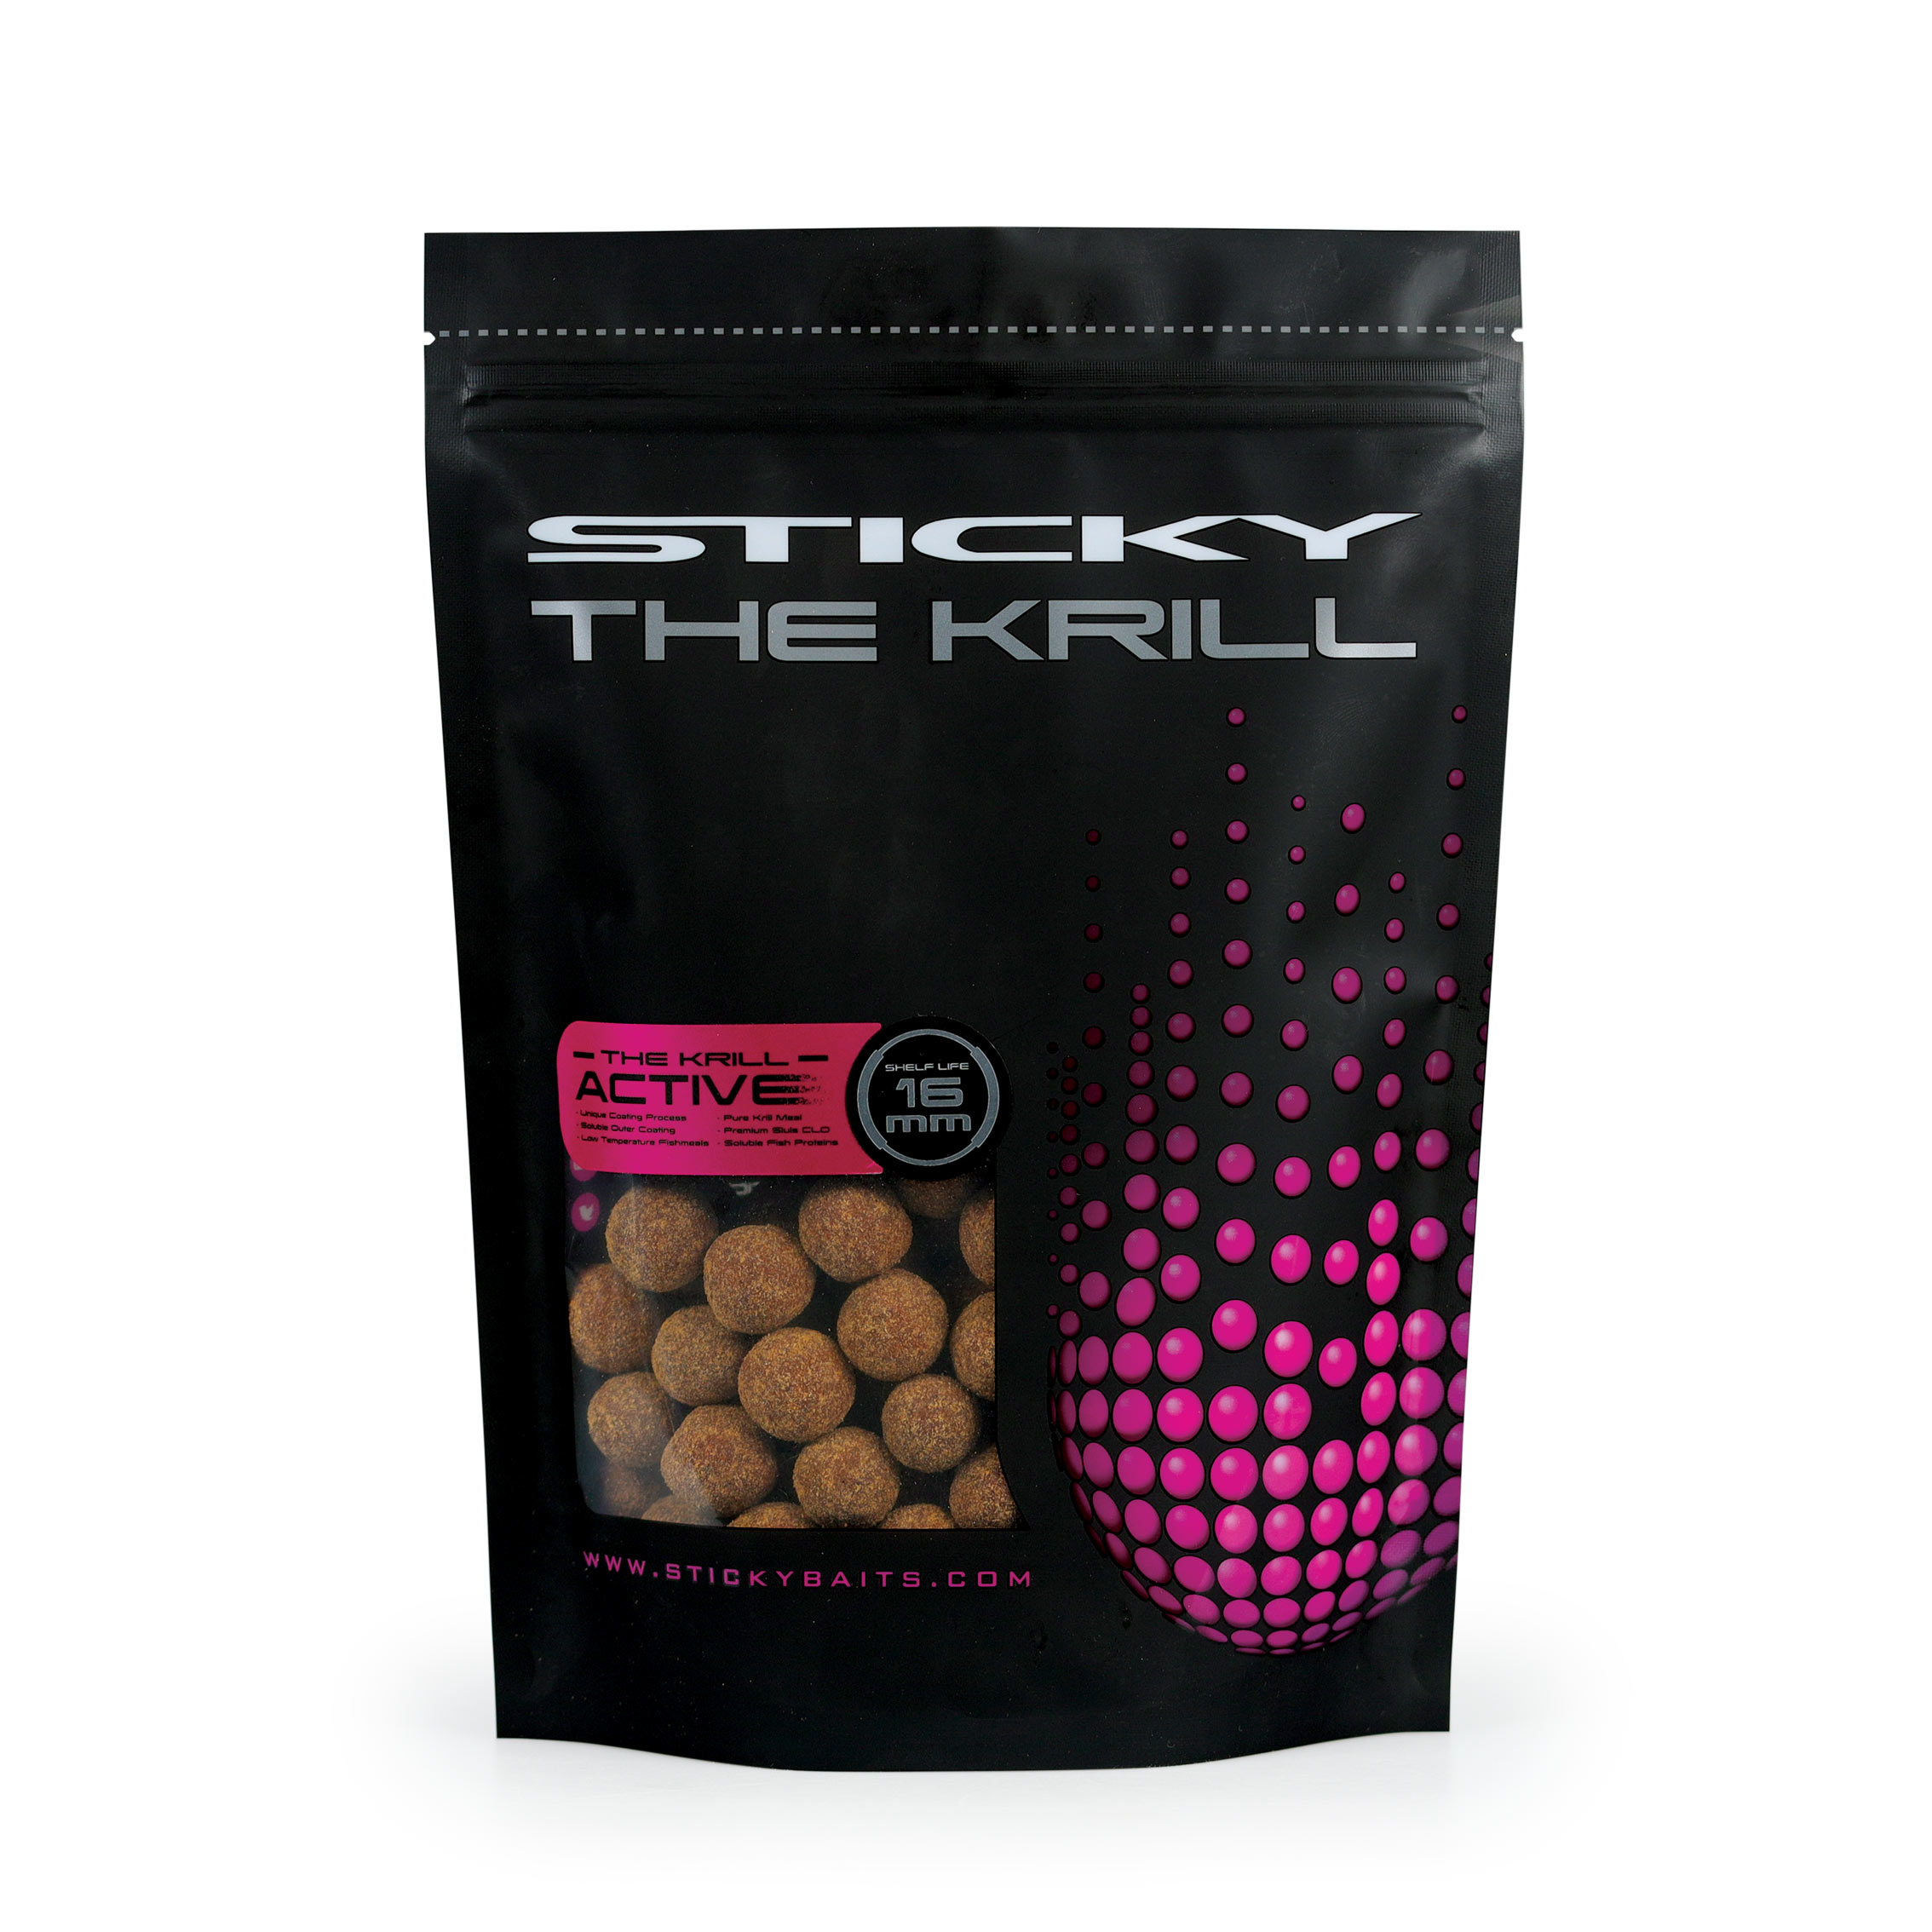 Sticky Baits - Products - The Krill - Active Pop-Ups - Carp Fishing Bait